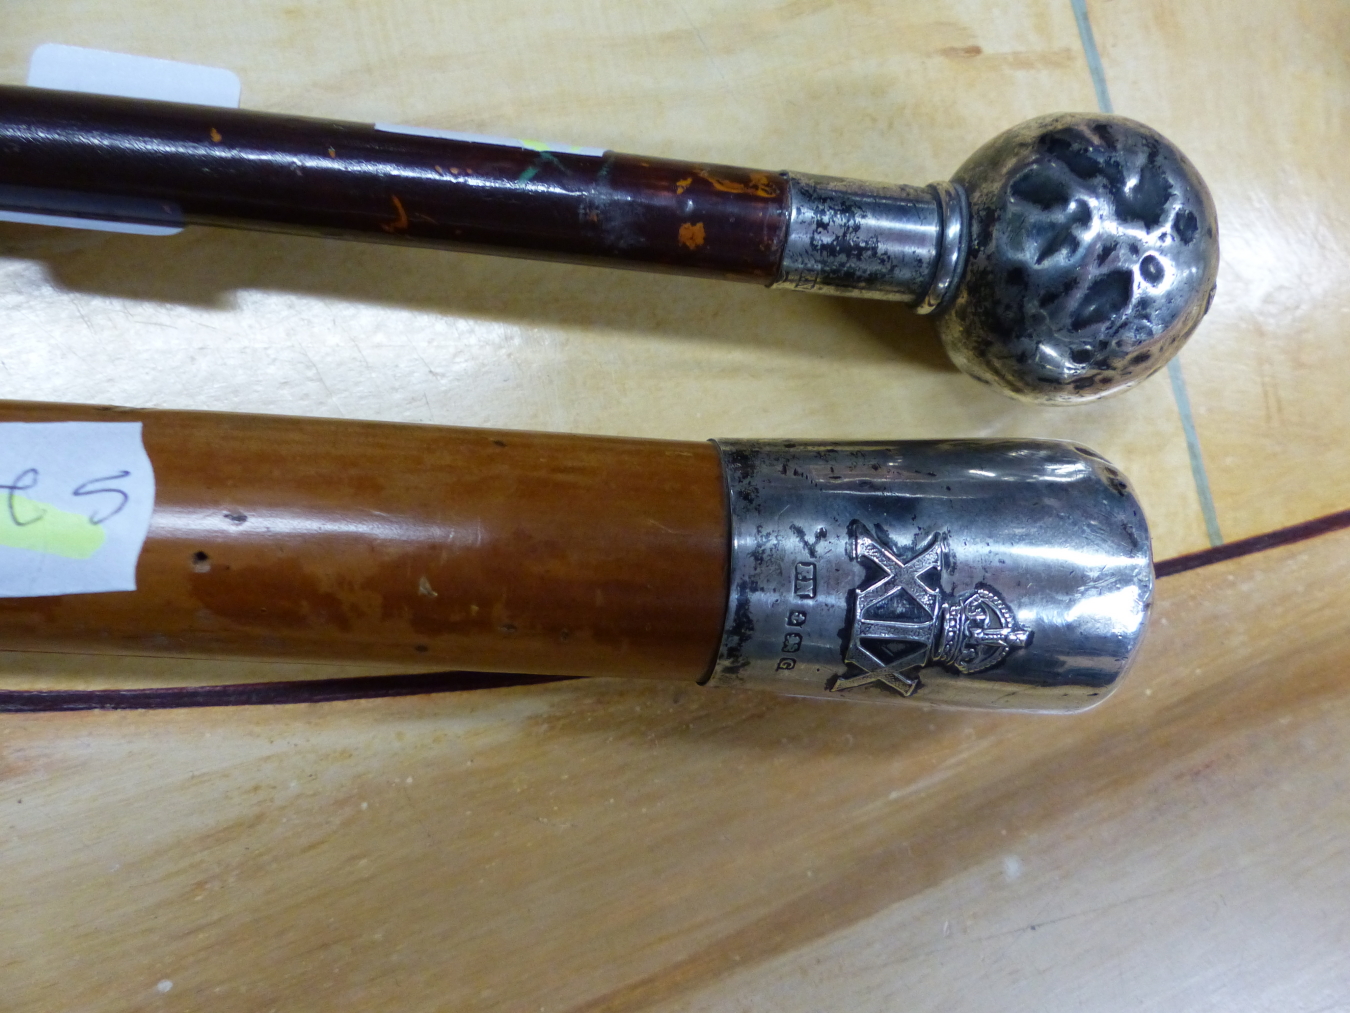 A SILVER MOUNTED SWAGGER STICK, BIRMINGHAM 1931 WITH A CROWN OVER XIX IN RELIEF, POSSIBLY FOR THE